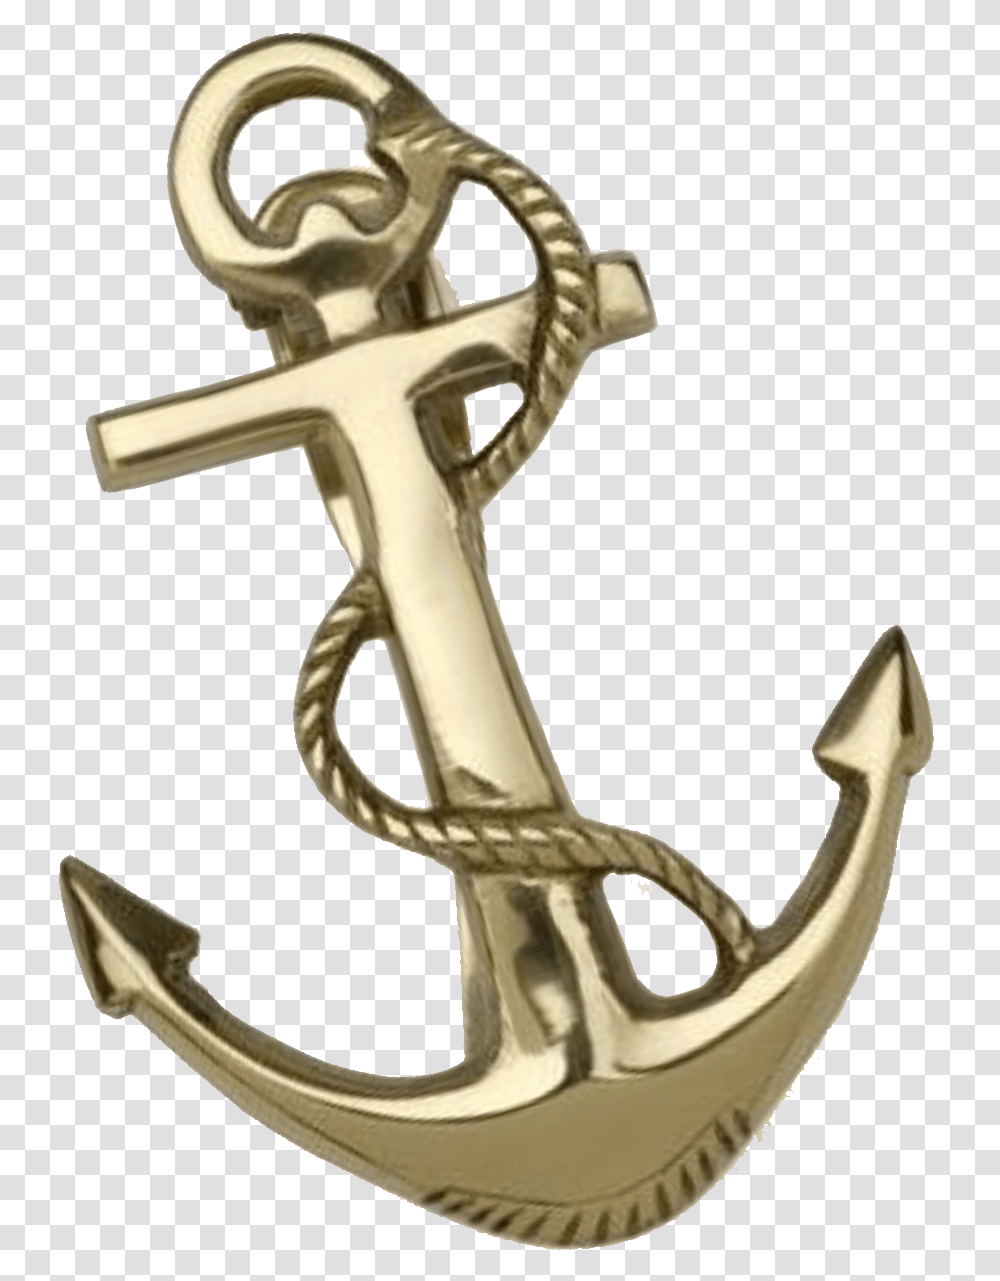 Anchor Images Free Download Anchor, Hook, Sink Faucet Transparent Png